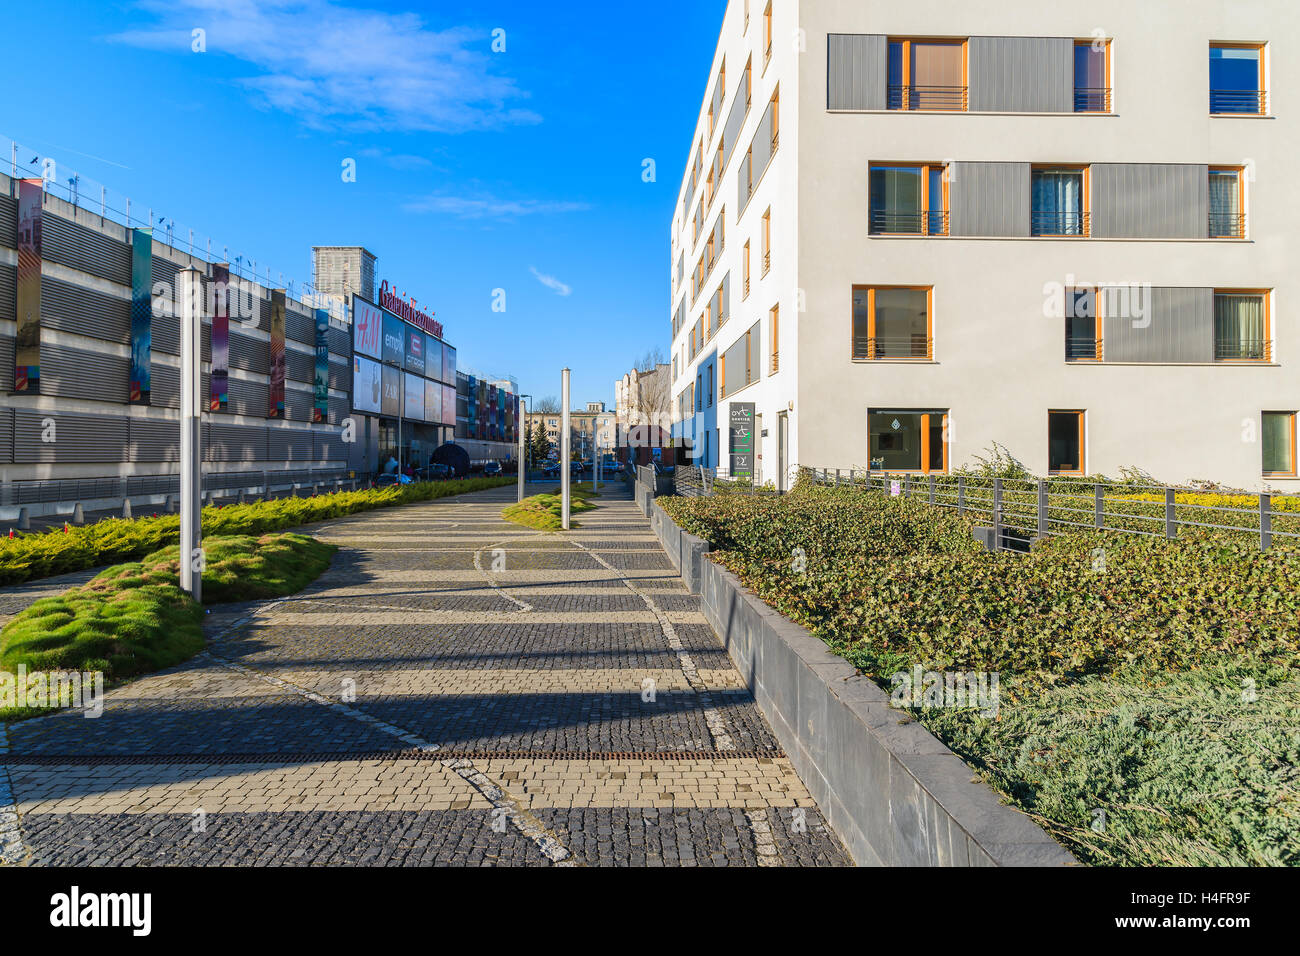 KRAKOW, POLAND - DEC 12, 2014: modern white apartment building in Kazimierz district of Krakow. This area is becoming a fashionable place to live a it is close to tourist attractions of city center. Stock Photo